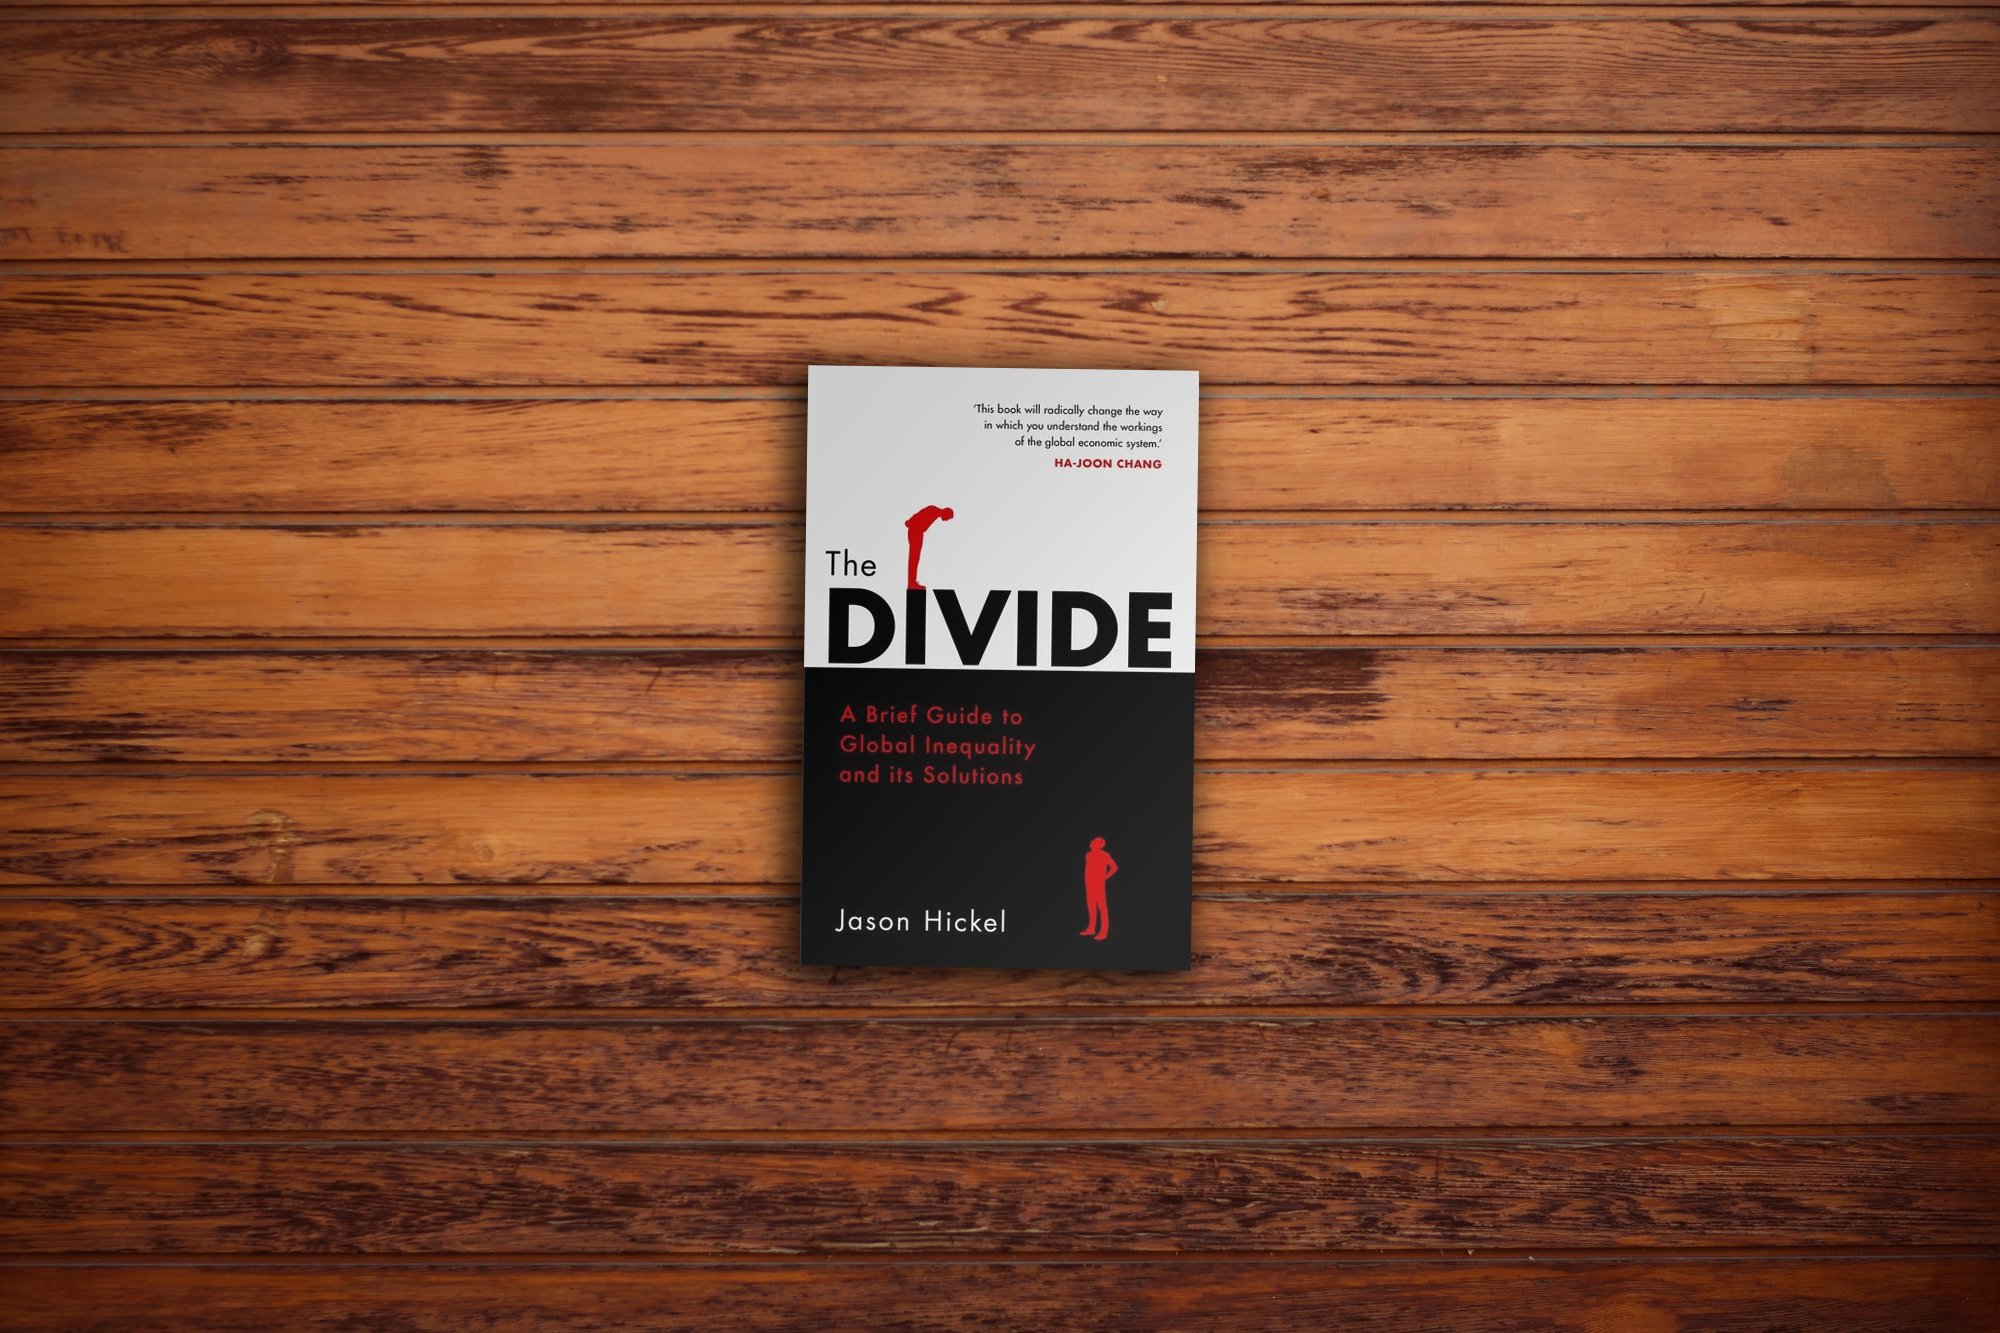 Photo of the book by Jason Hickel "The Divide". Background image by Aditya Joshi on Unsplash